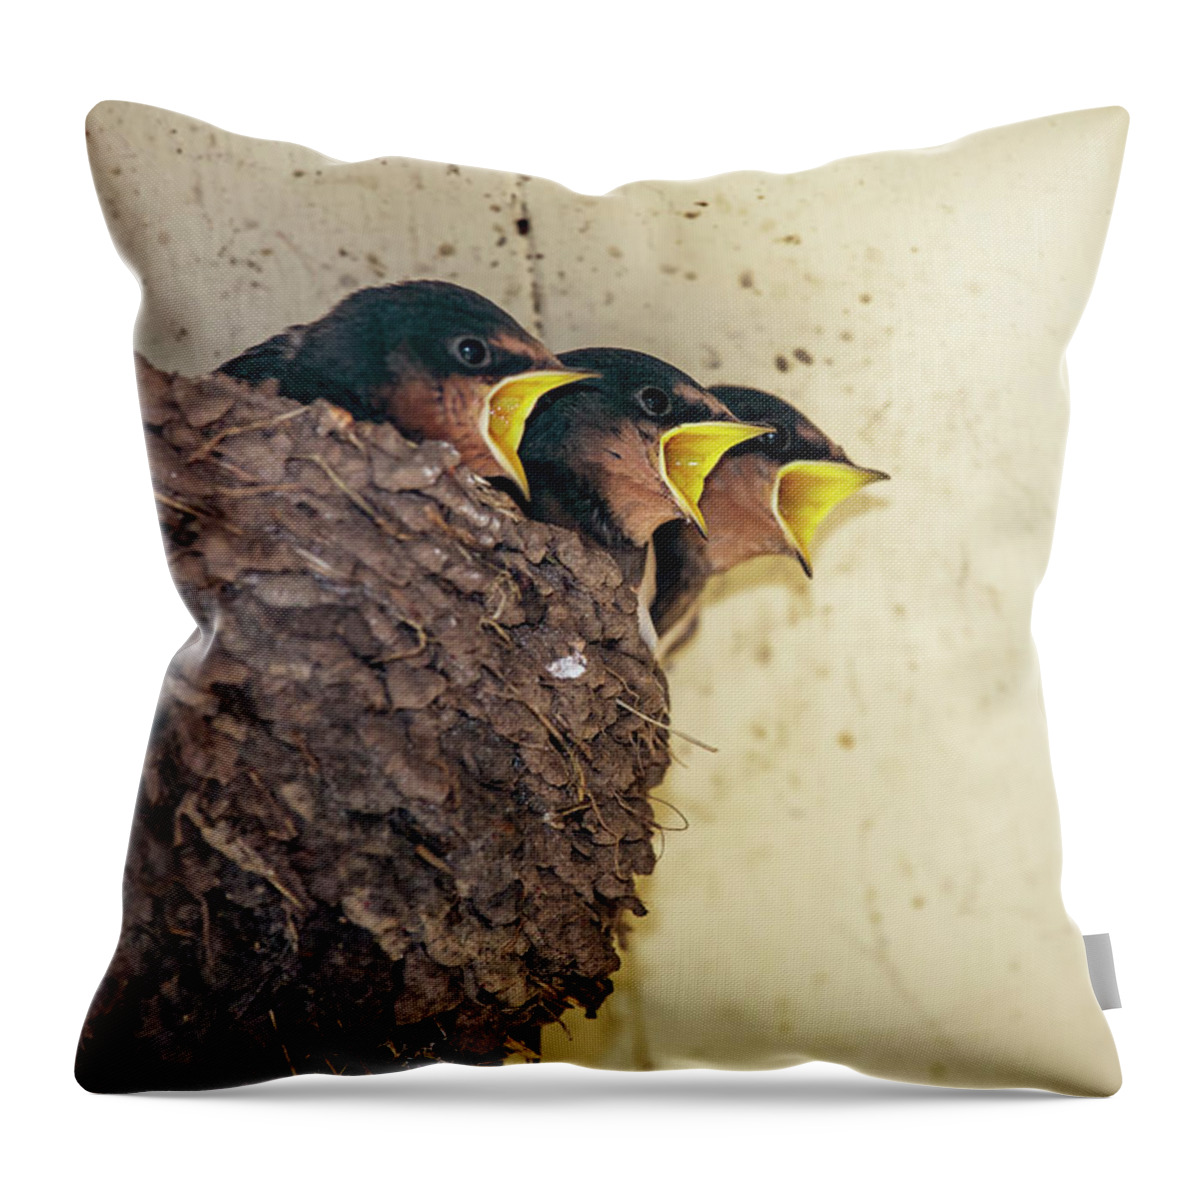 Three Animals Throw Pillow featuring the photograph Three Baby Birds In A Nest Calling To by John Short / Design Pics